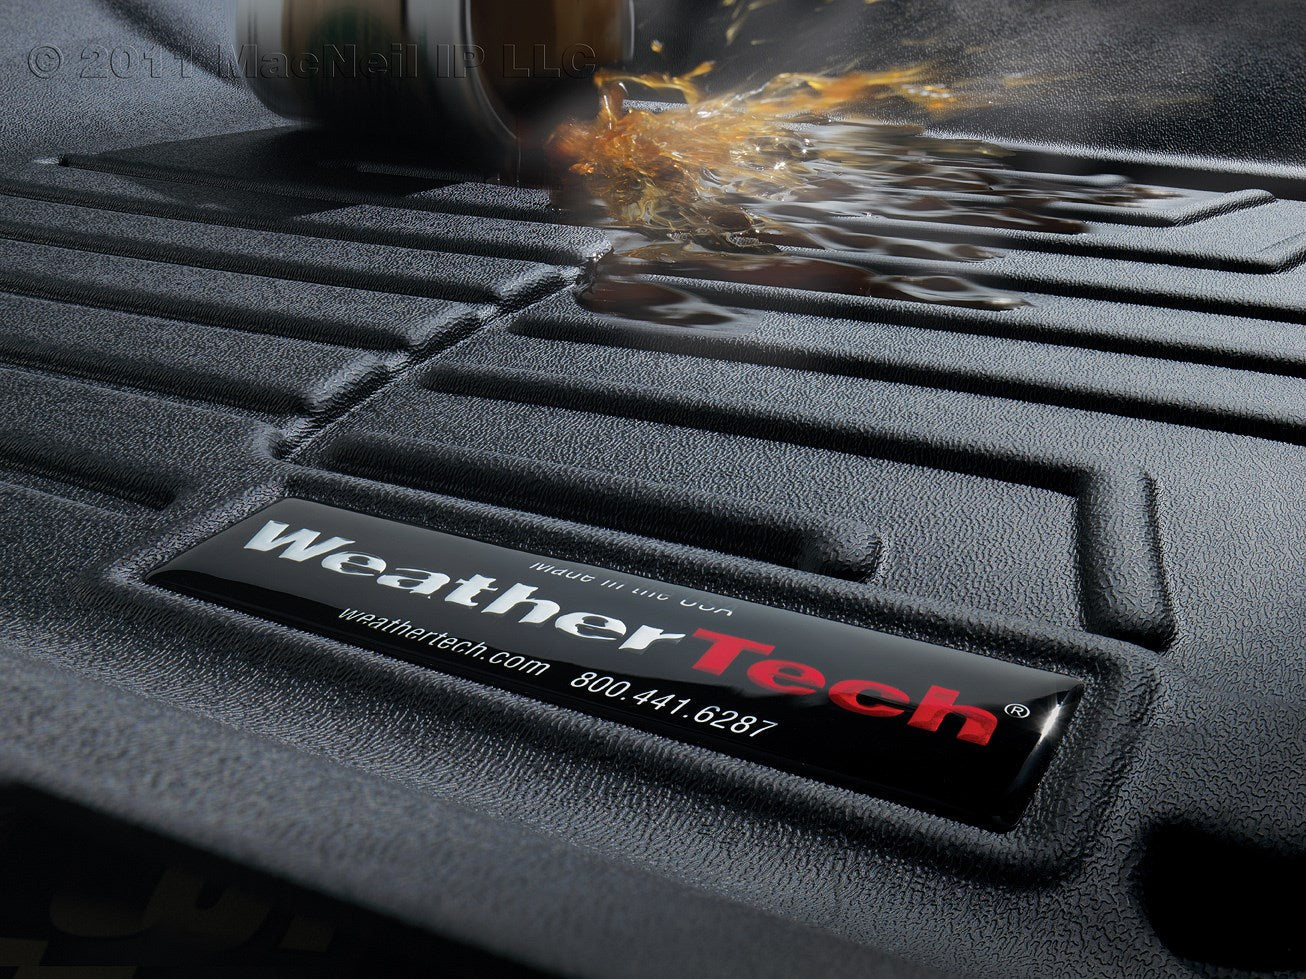 WeatherTech 3D "custom-made" car mats offer the ultimate protection for the inside of your vehicle.  They fit perfectly, with high sides that retain water, dirt and any other liquids or particles.